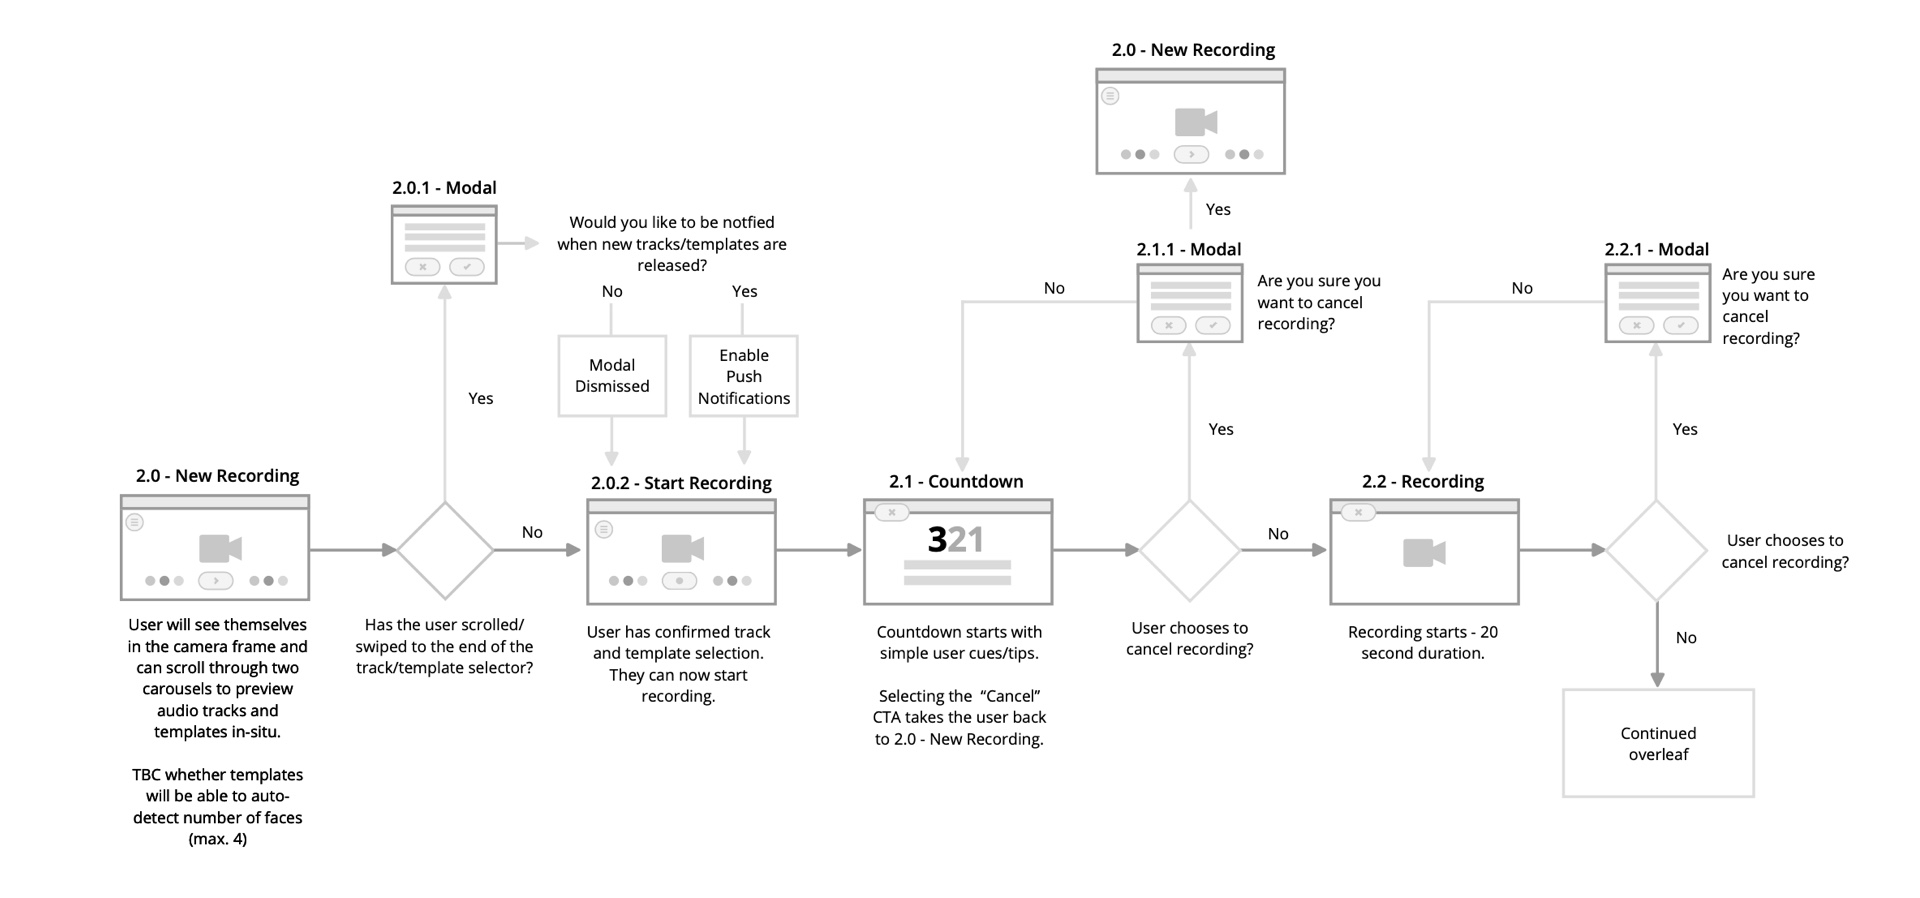 Schematic showing the user flow for a new recording within the TalkTalk FX Star App